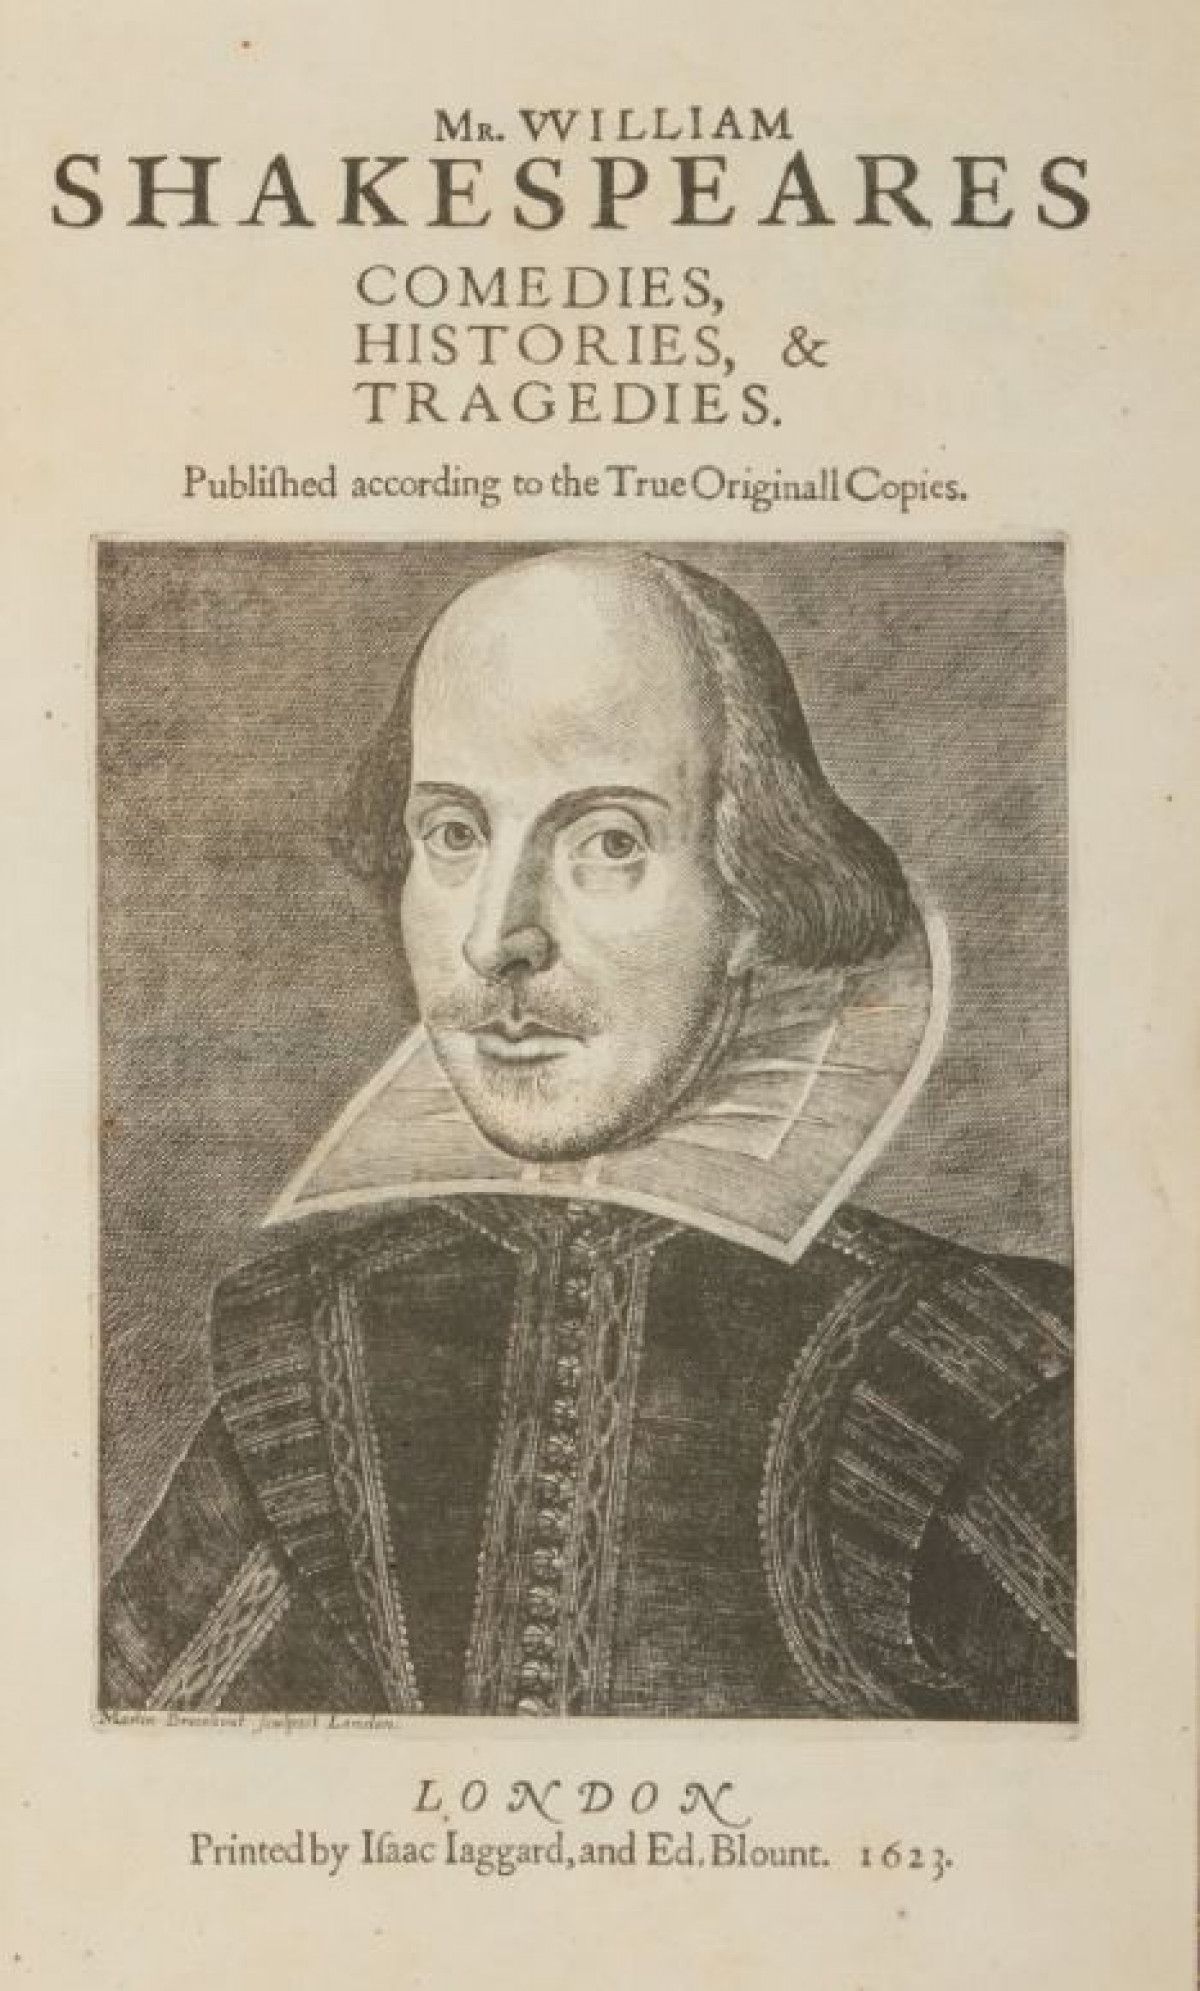 The book, in which Shakespeare's plays were published in bulk, sold for $ 2.5 million #1